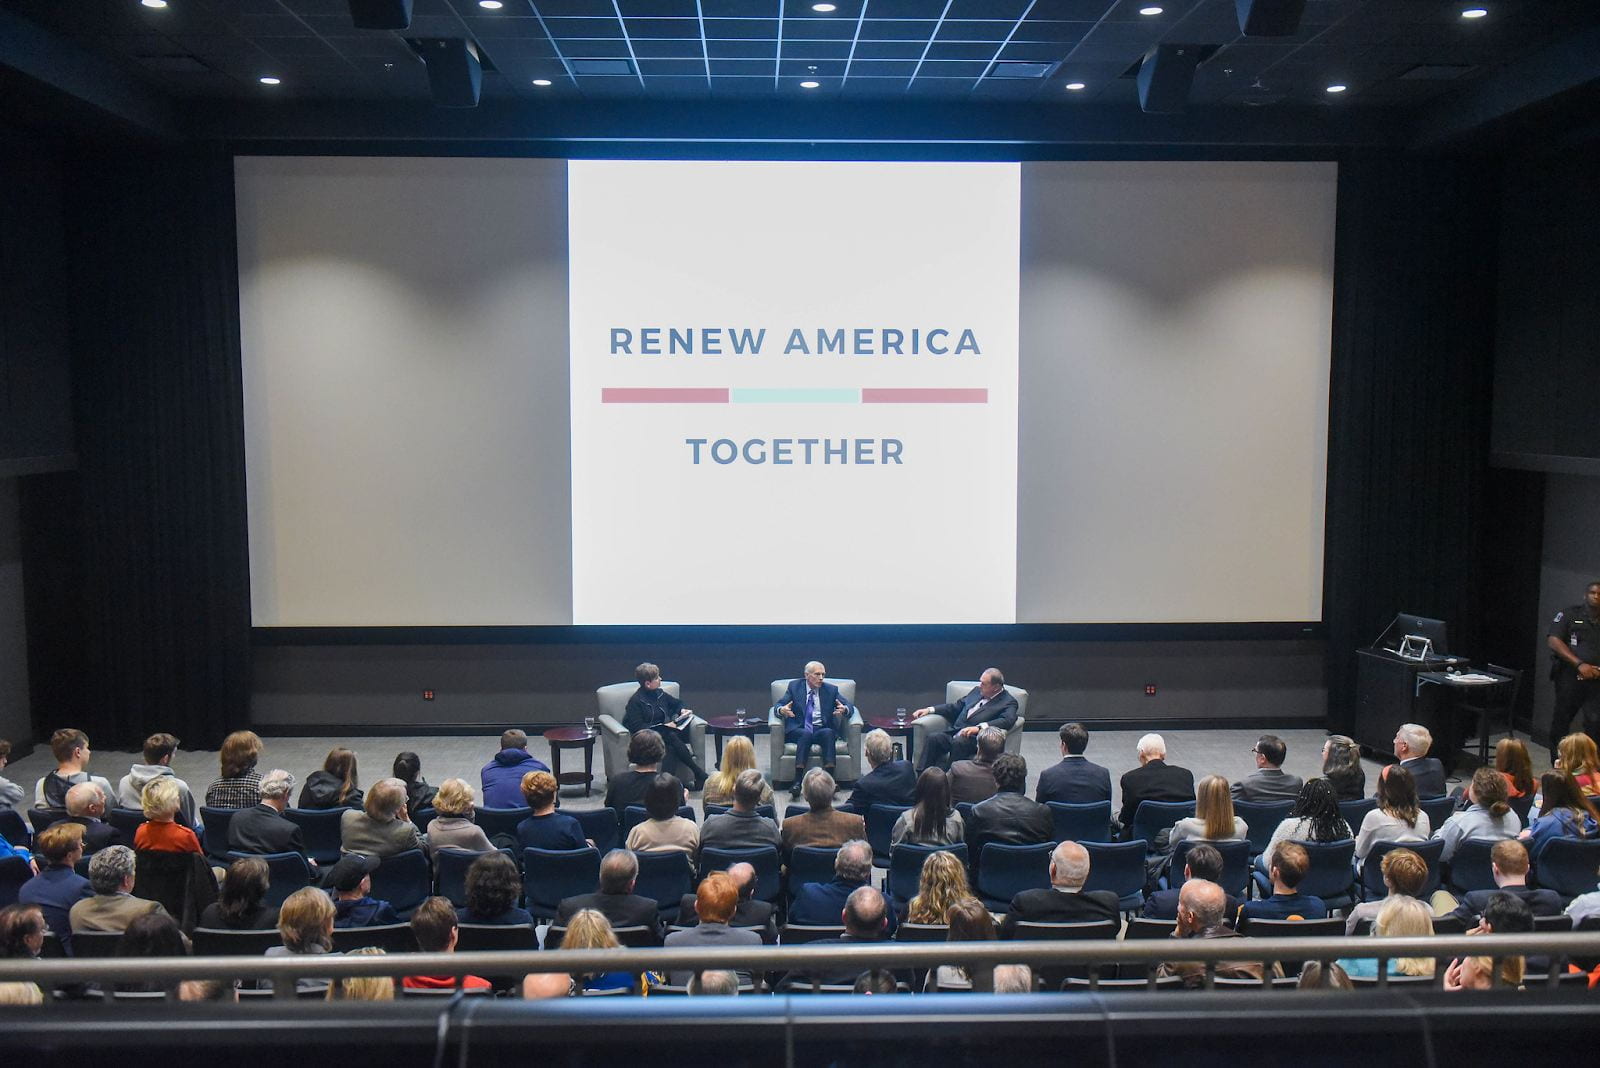 Audience members watch a discussion between Wesley Clarke and Mike Huckabee facilitates by "Renew America Together"